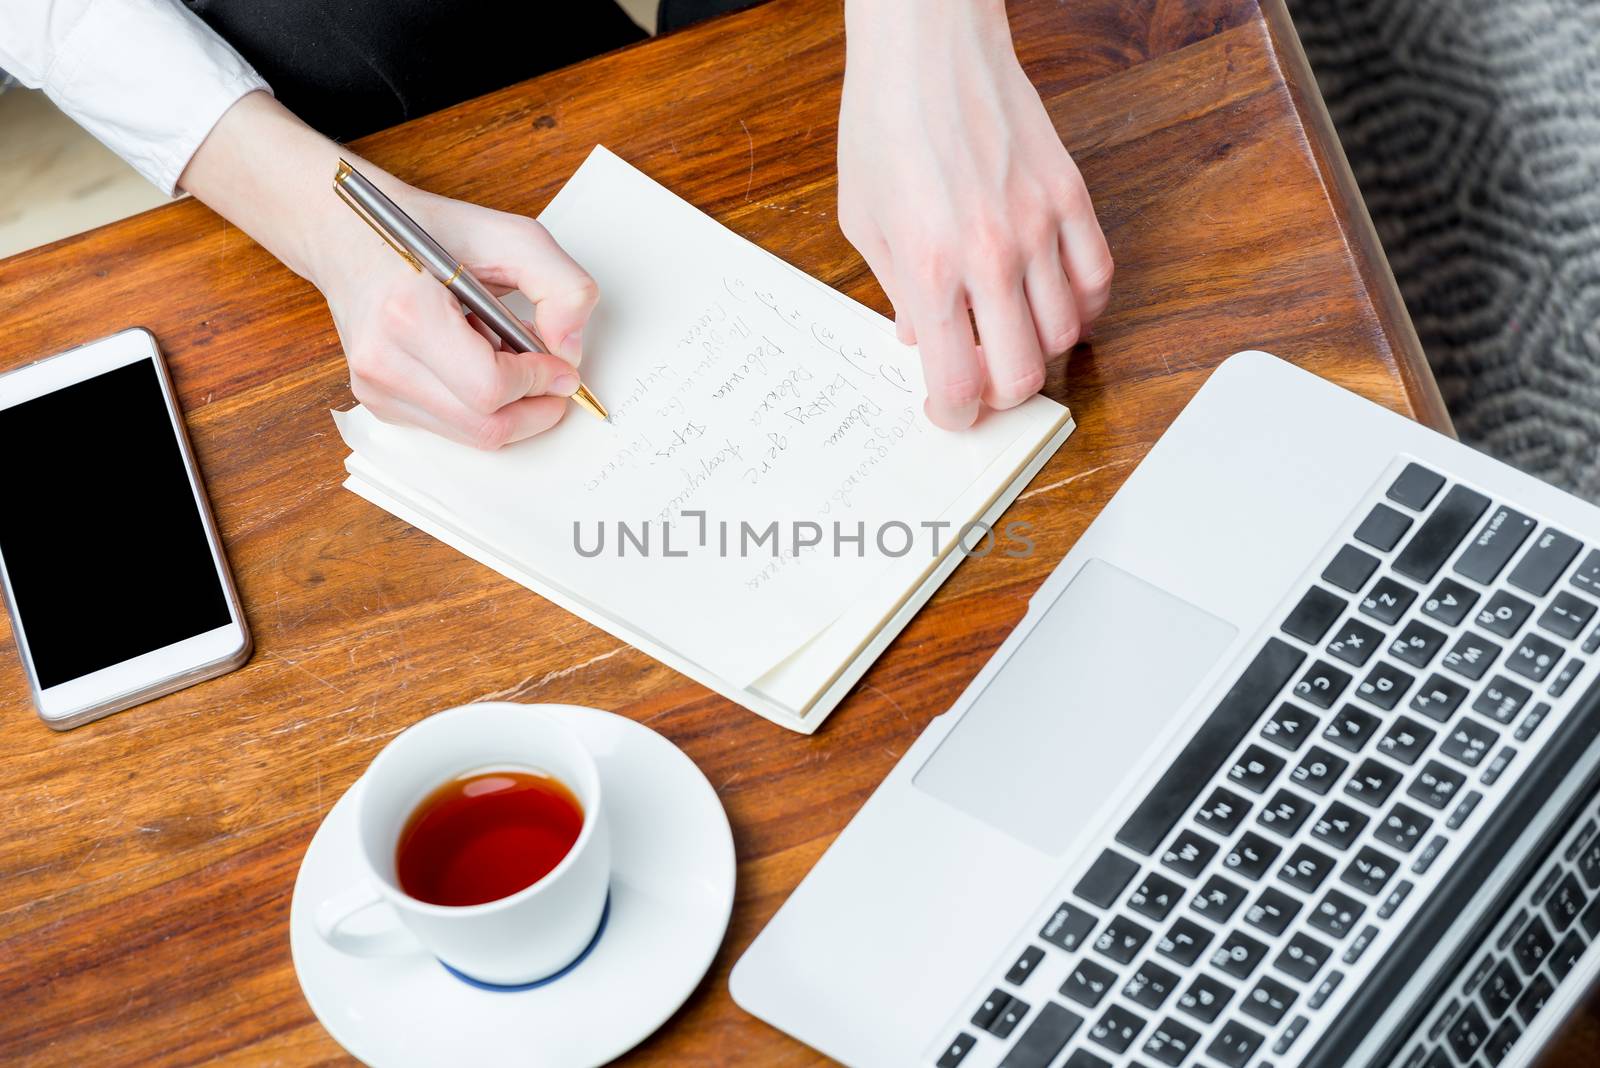 view of the hands at work, writing important information to the by kosmsos111